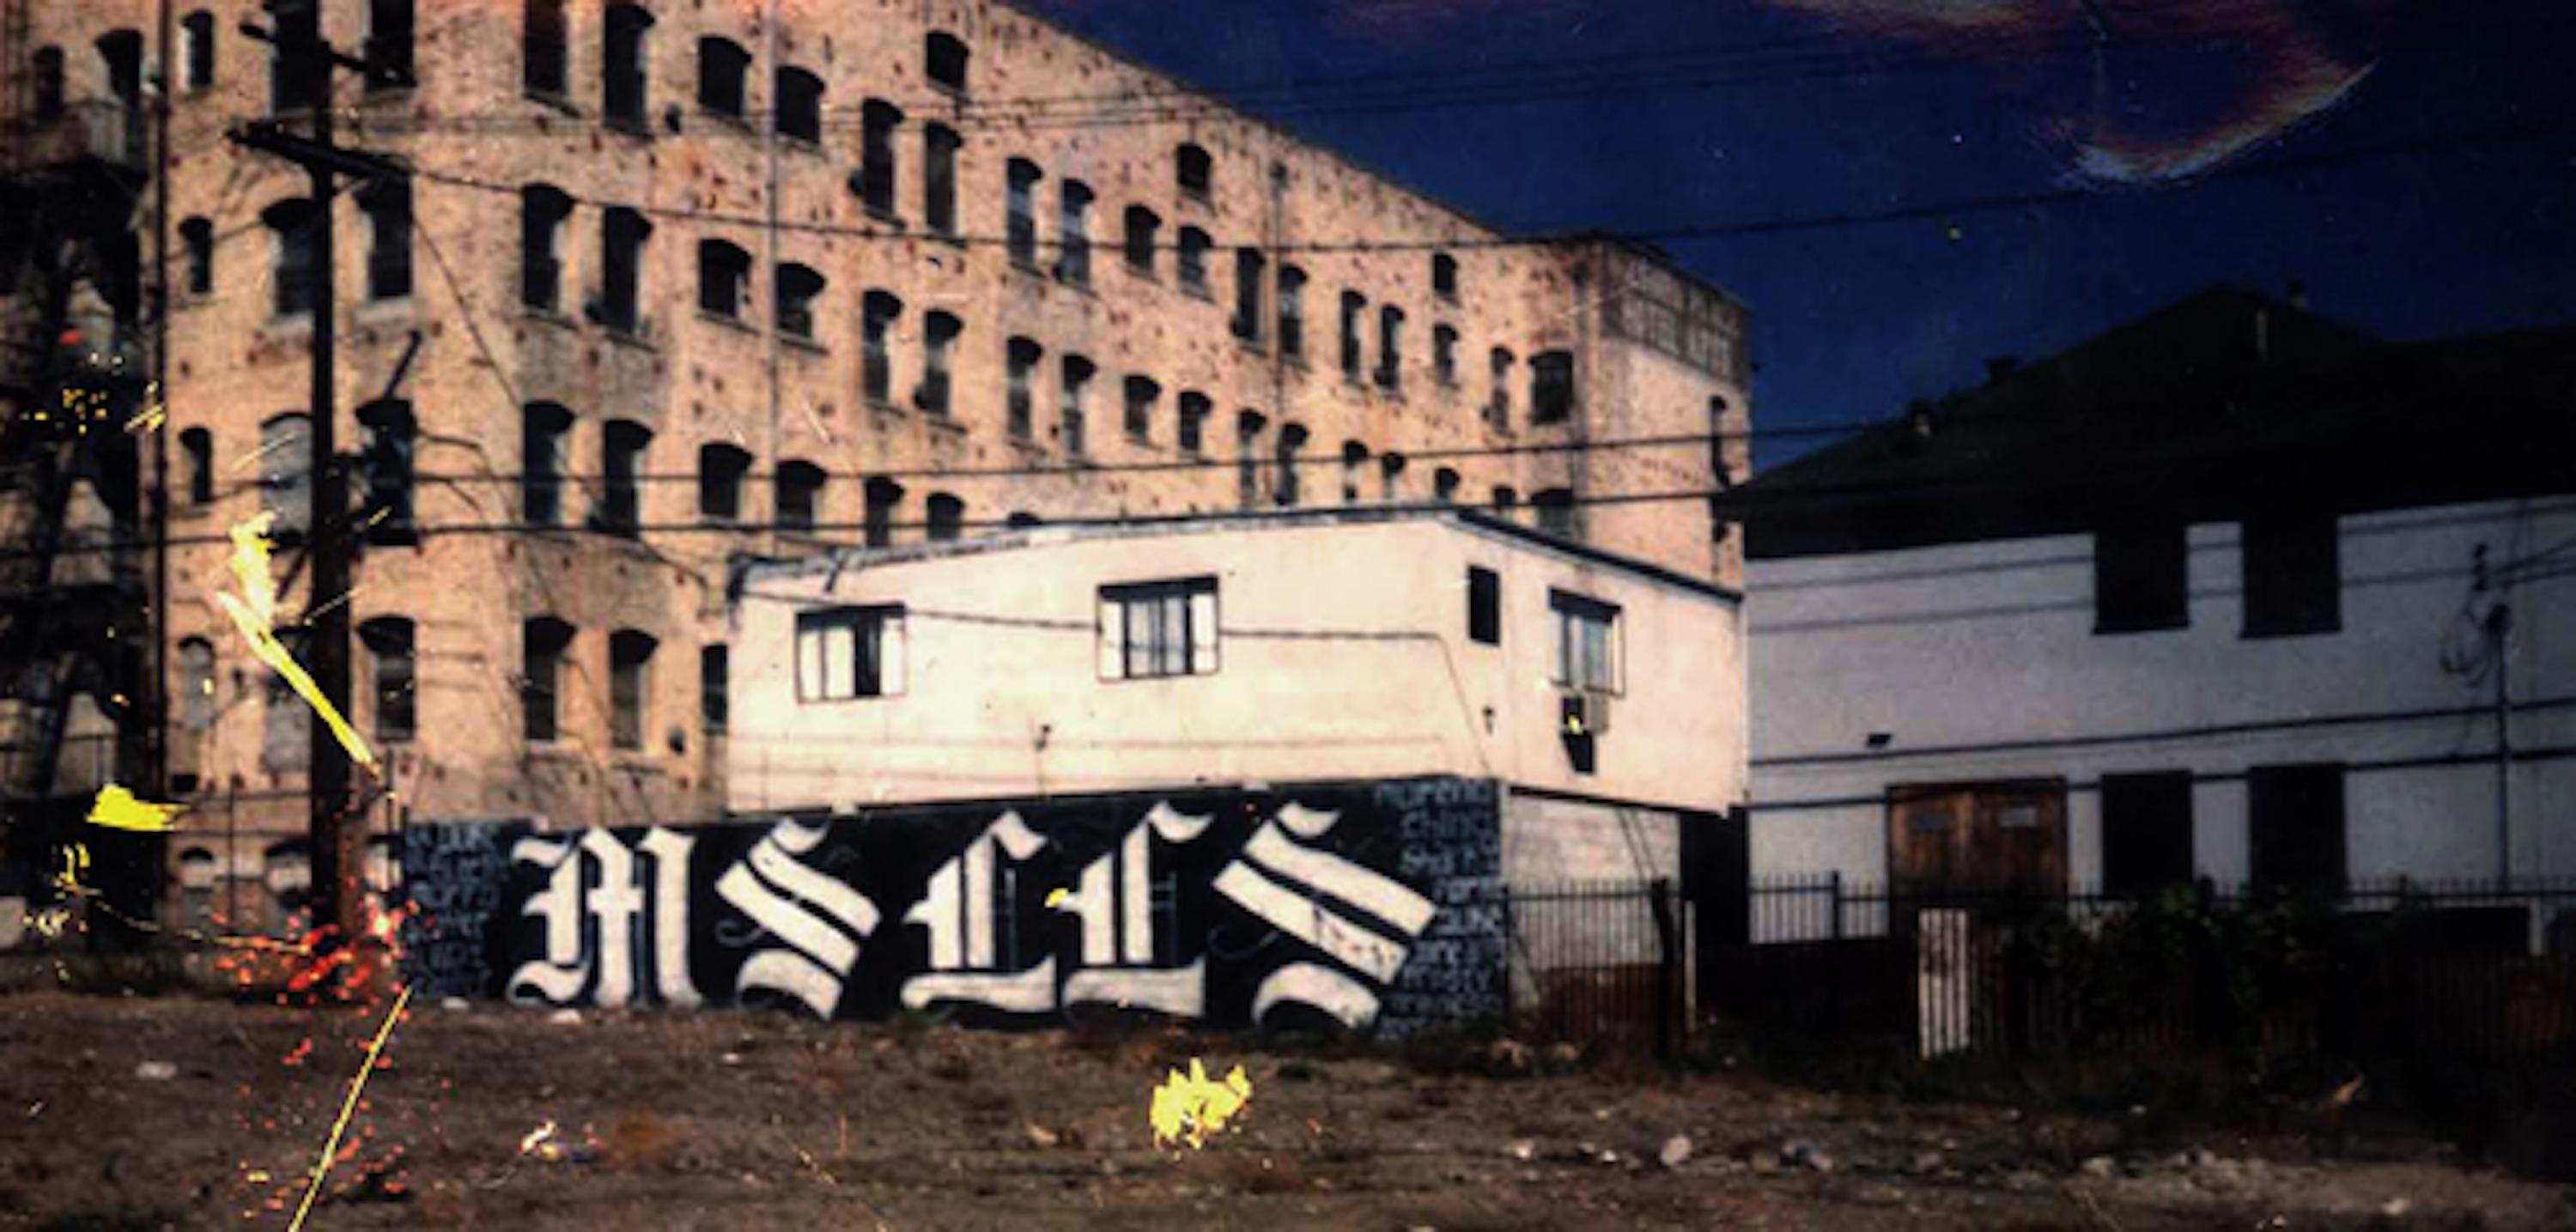 Mural painted by the Leeward Locos clique of the Mara Salvatrucha on the back end of Leeward Avenue in Los Angeles, between Westmoreland and Hoover Streets. Photograph taken in the second half of the eighties.